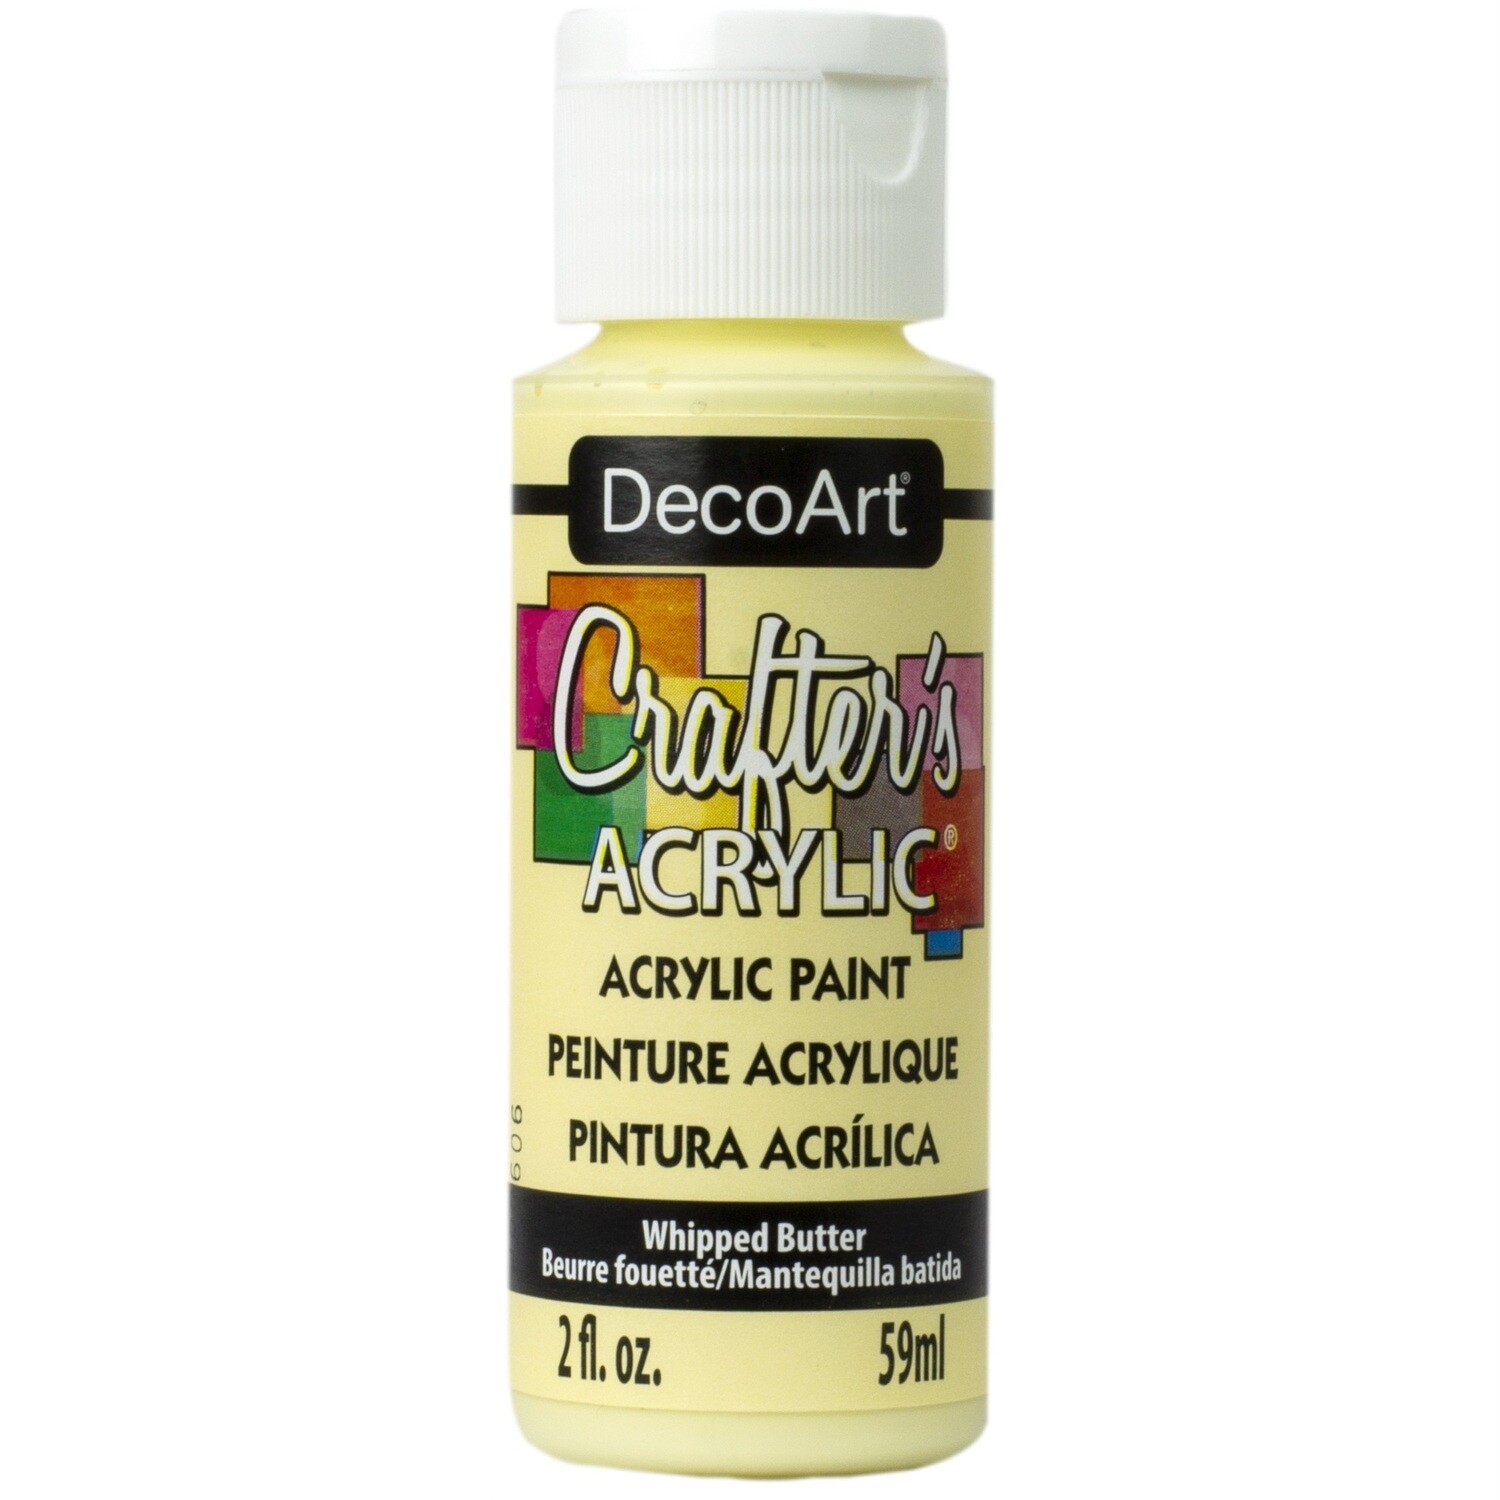 DecoArt.  Crafters Acrylic.  Whipped Butter.  DCA151. 2fl Oz.